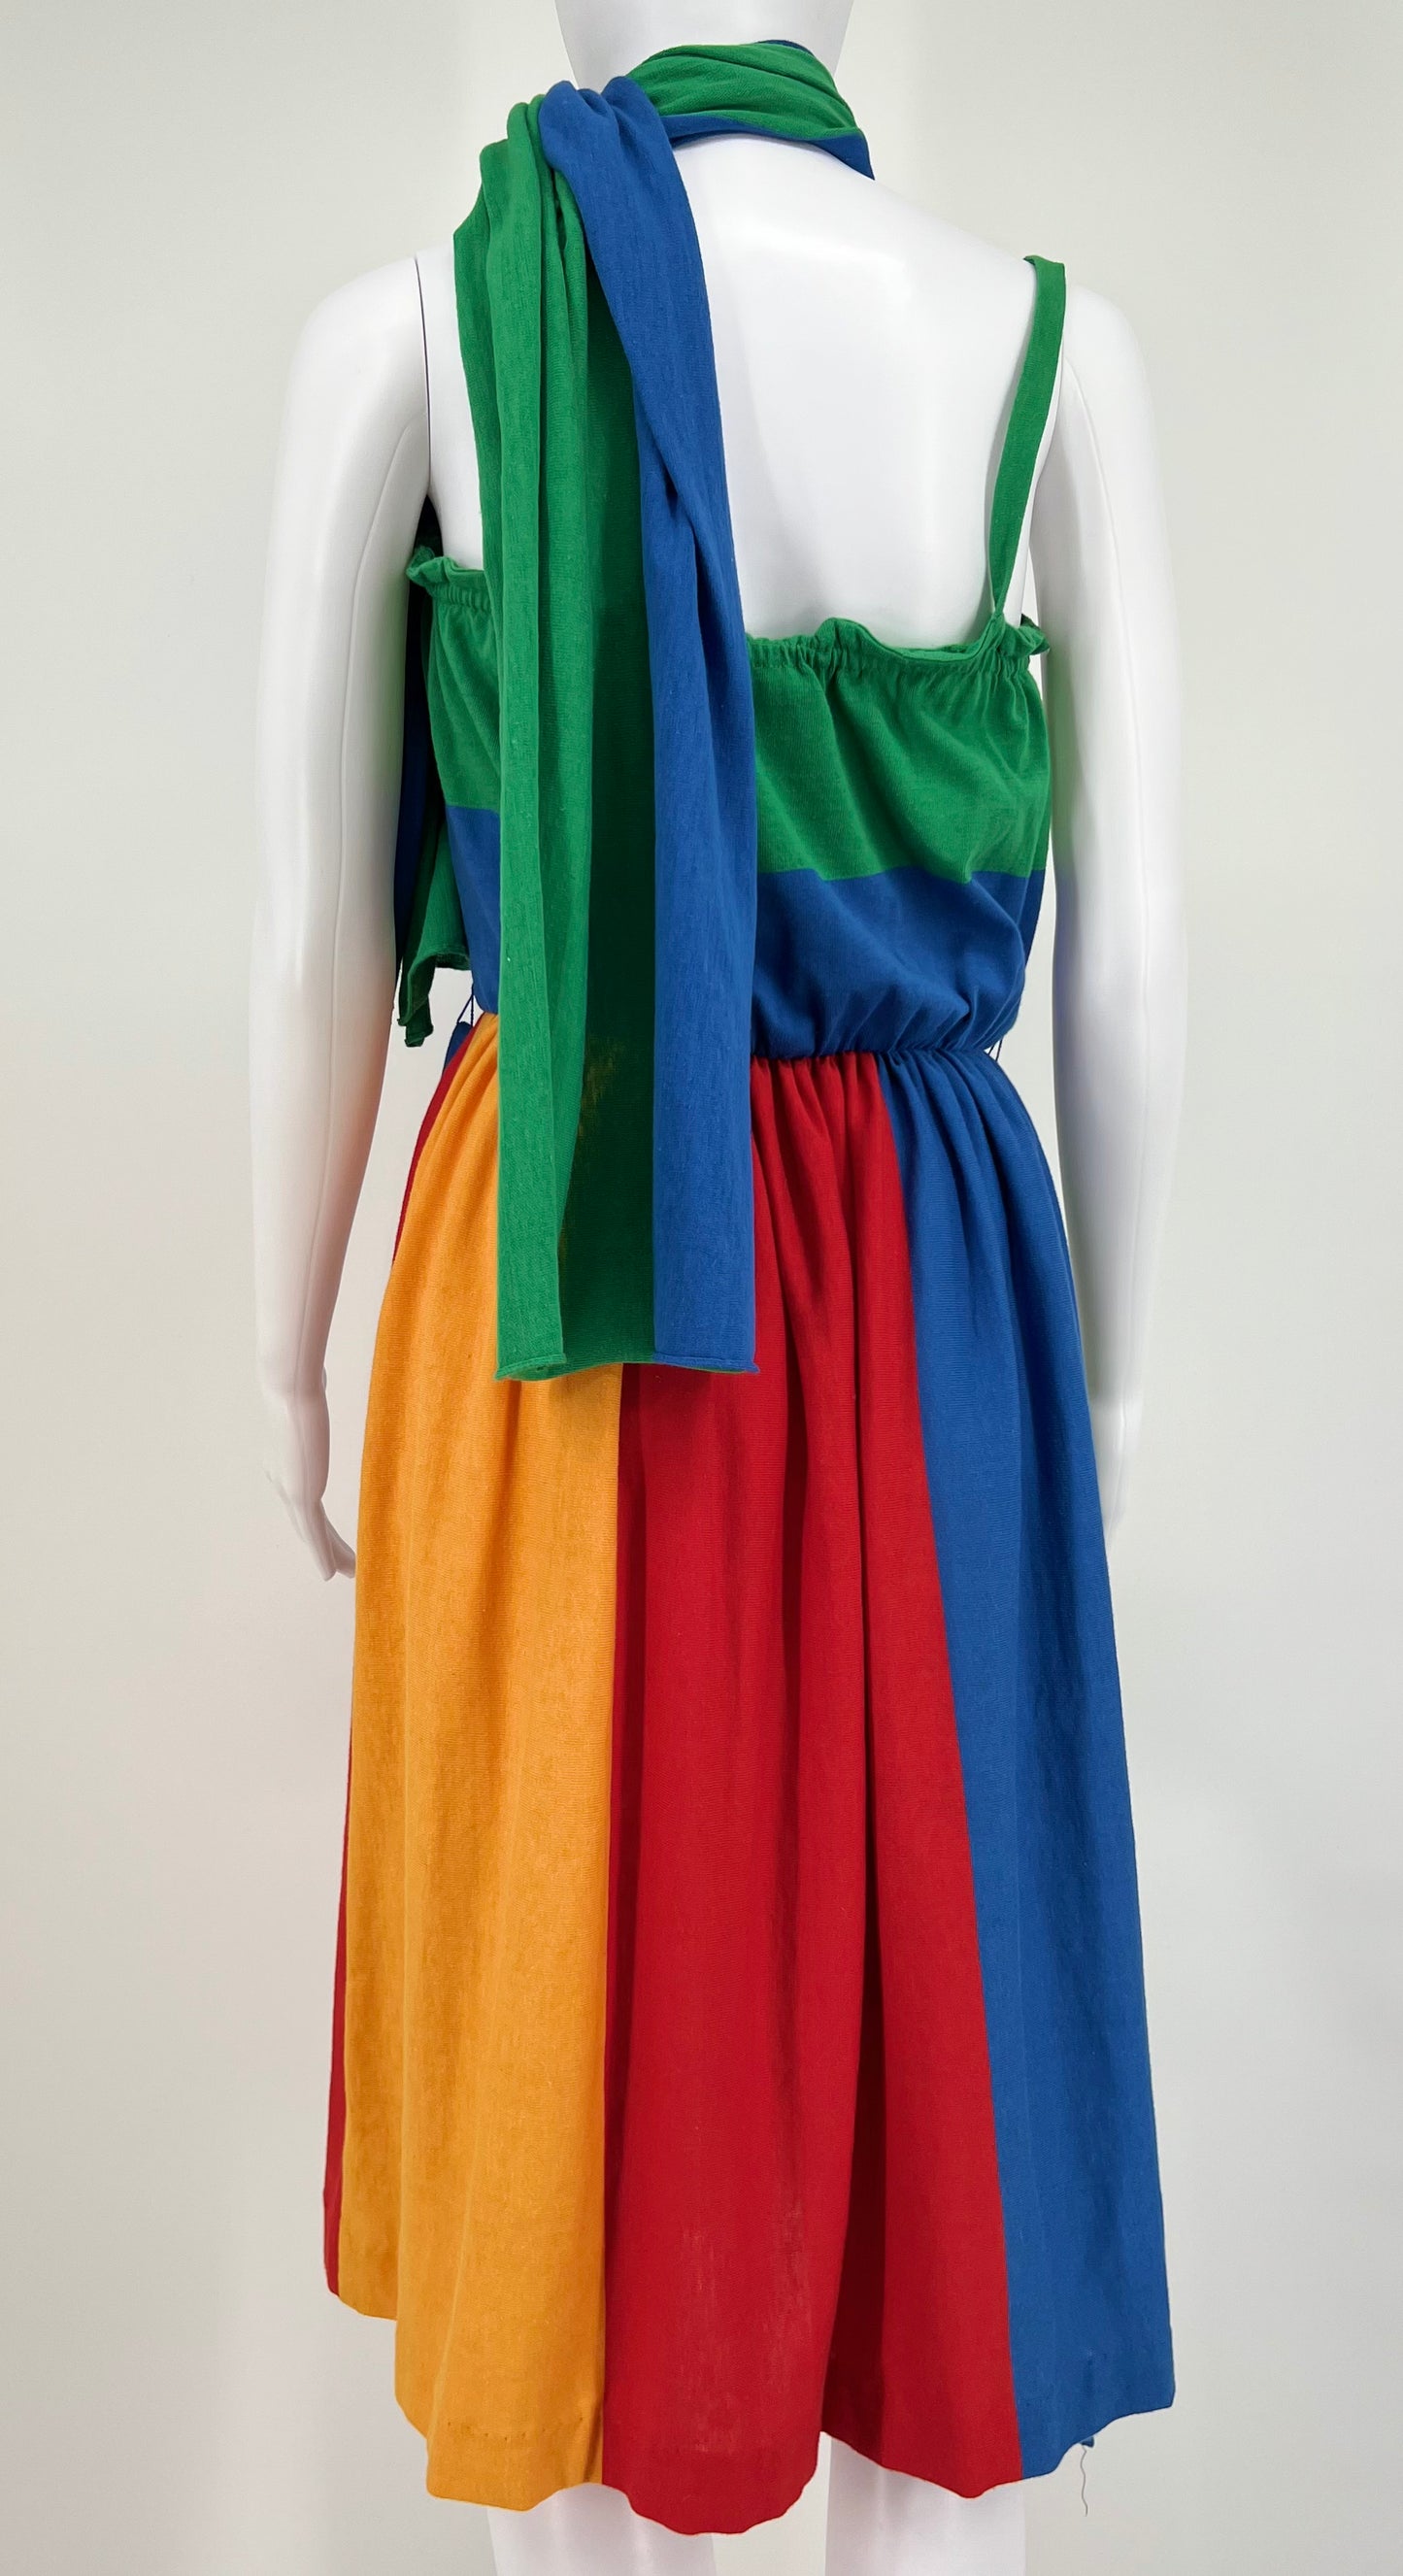 Vintage 80s Caron Chicago Abstract Colorblock Spaghetti-Strap Dress with Matching Scarf (Blue / Green / Yellow / Red) WOMENS S/M